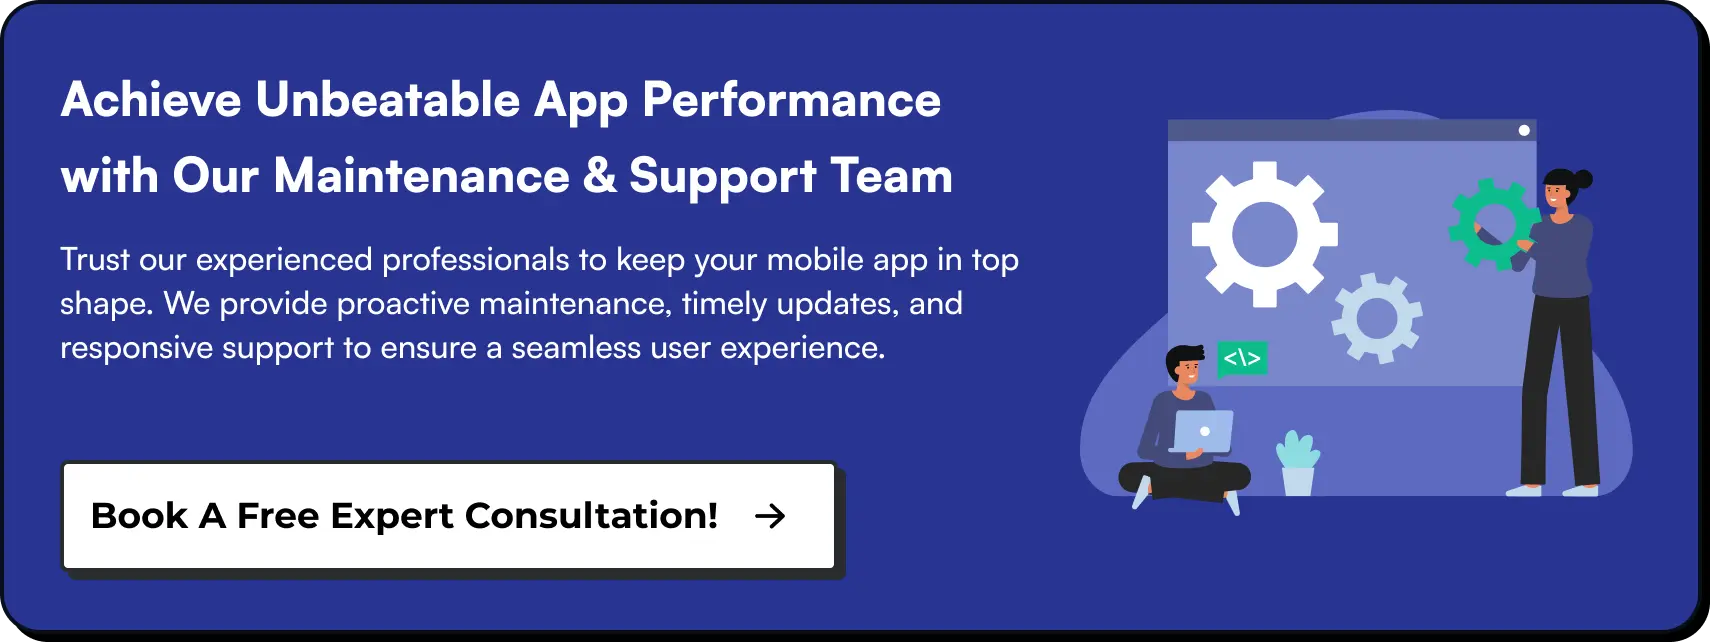 Achieve Unbeatable App Performance with Our Maintenance Support Team